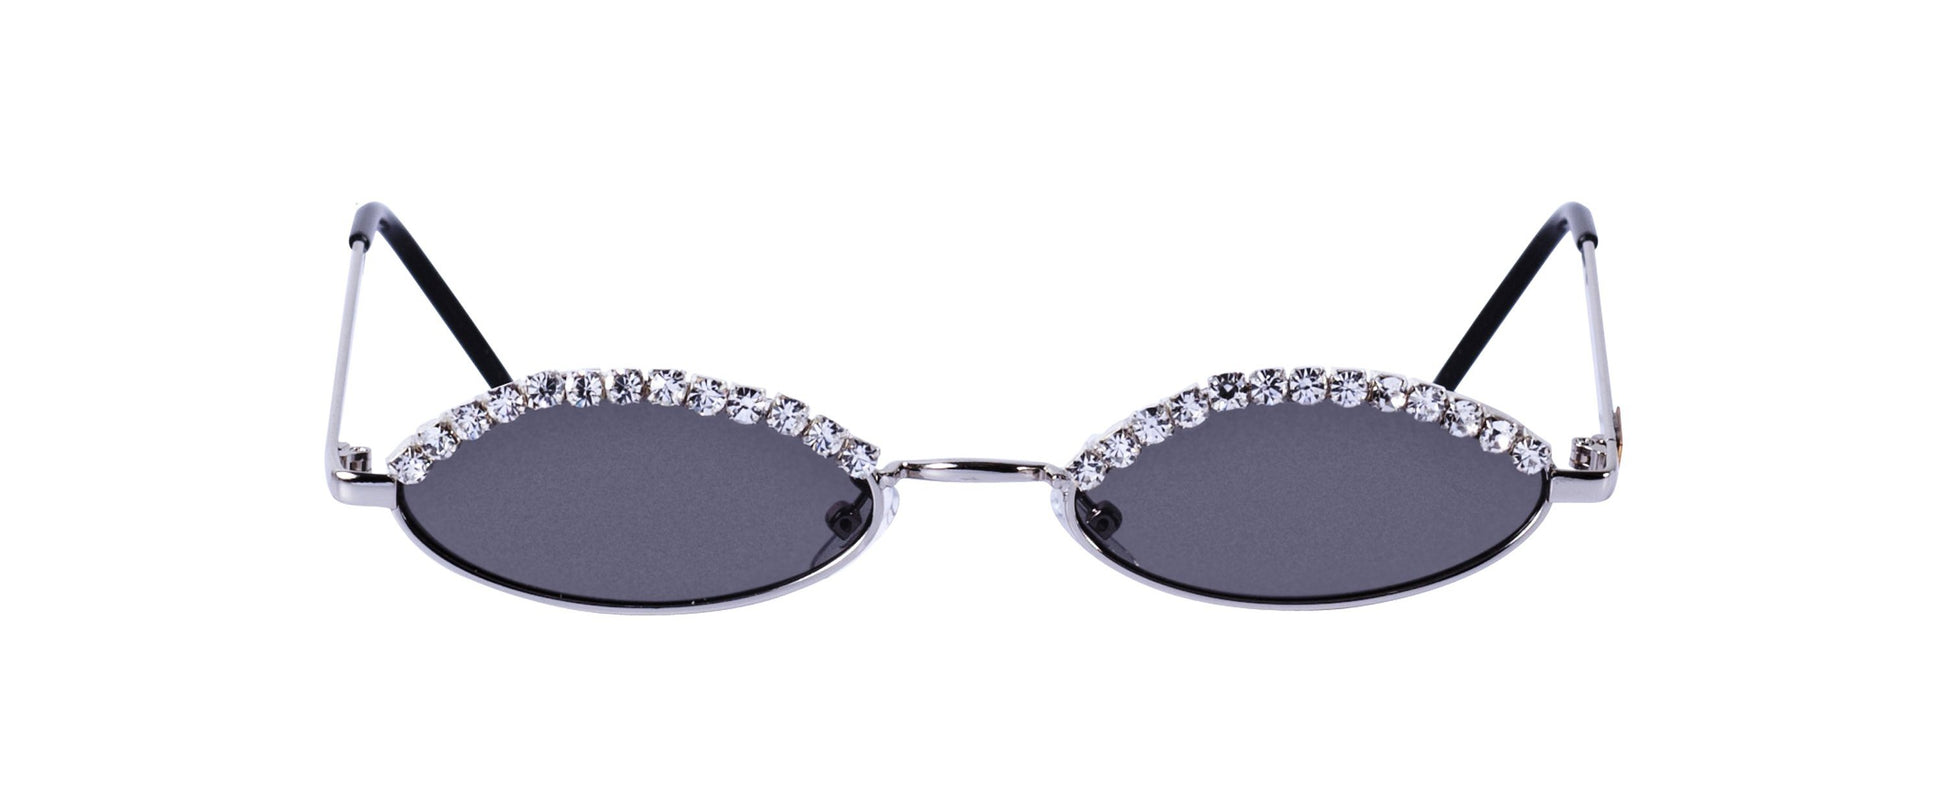 PEEPIN' YOU SUNNIES: Black Out Edition icy jet - silver frame SUNNIES + OPTICS Sunglasses Collection- NRODA